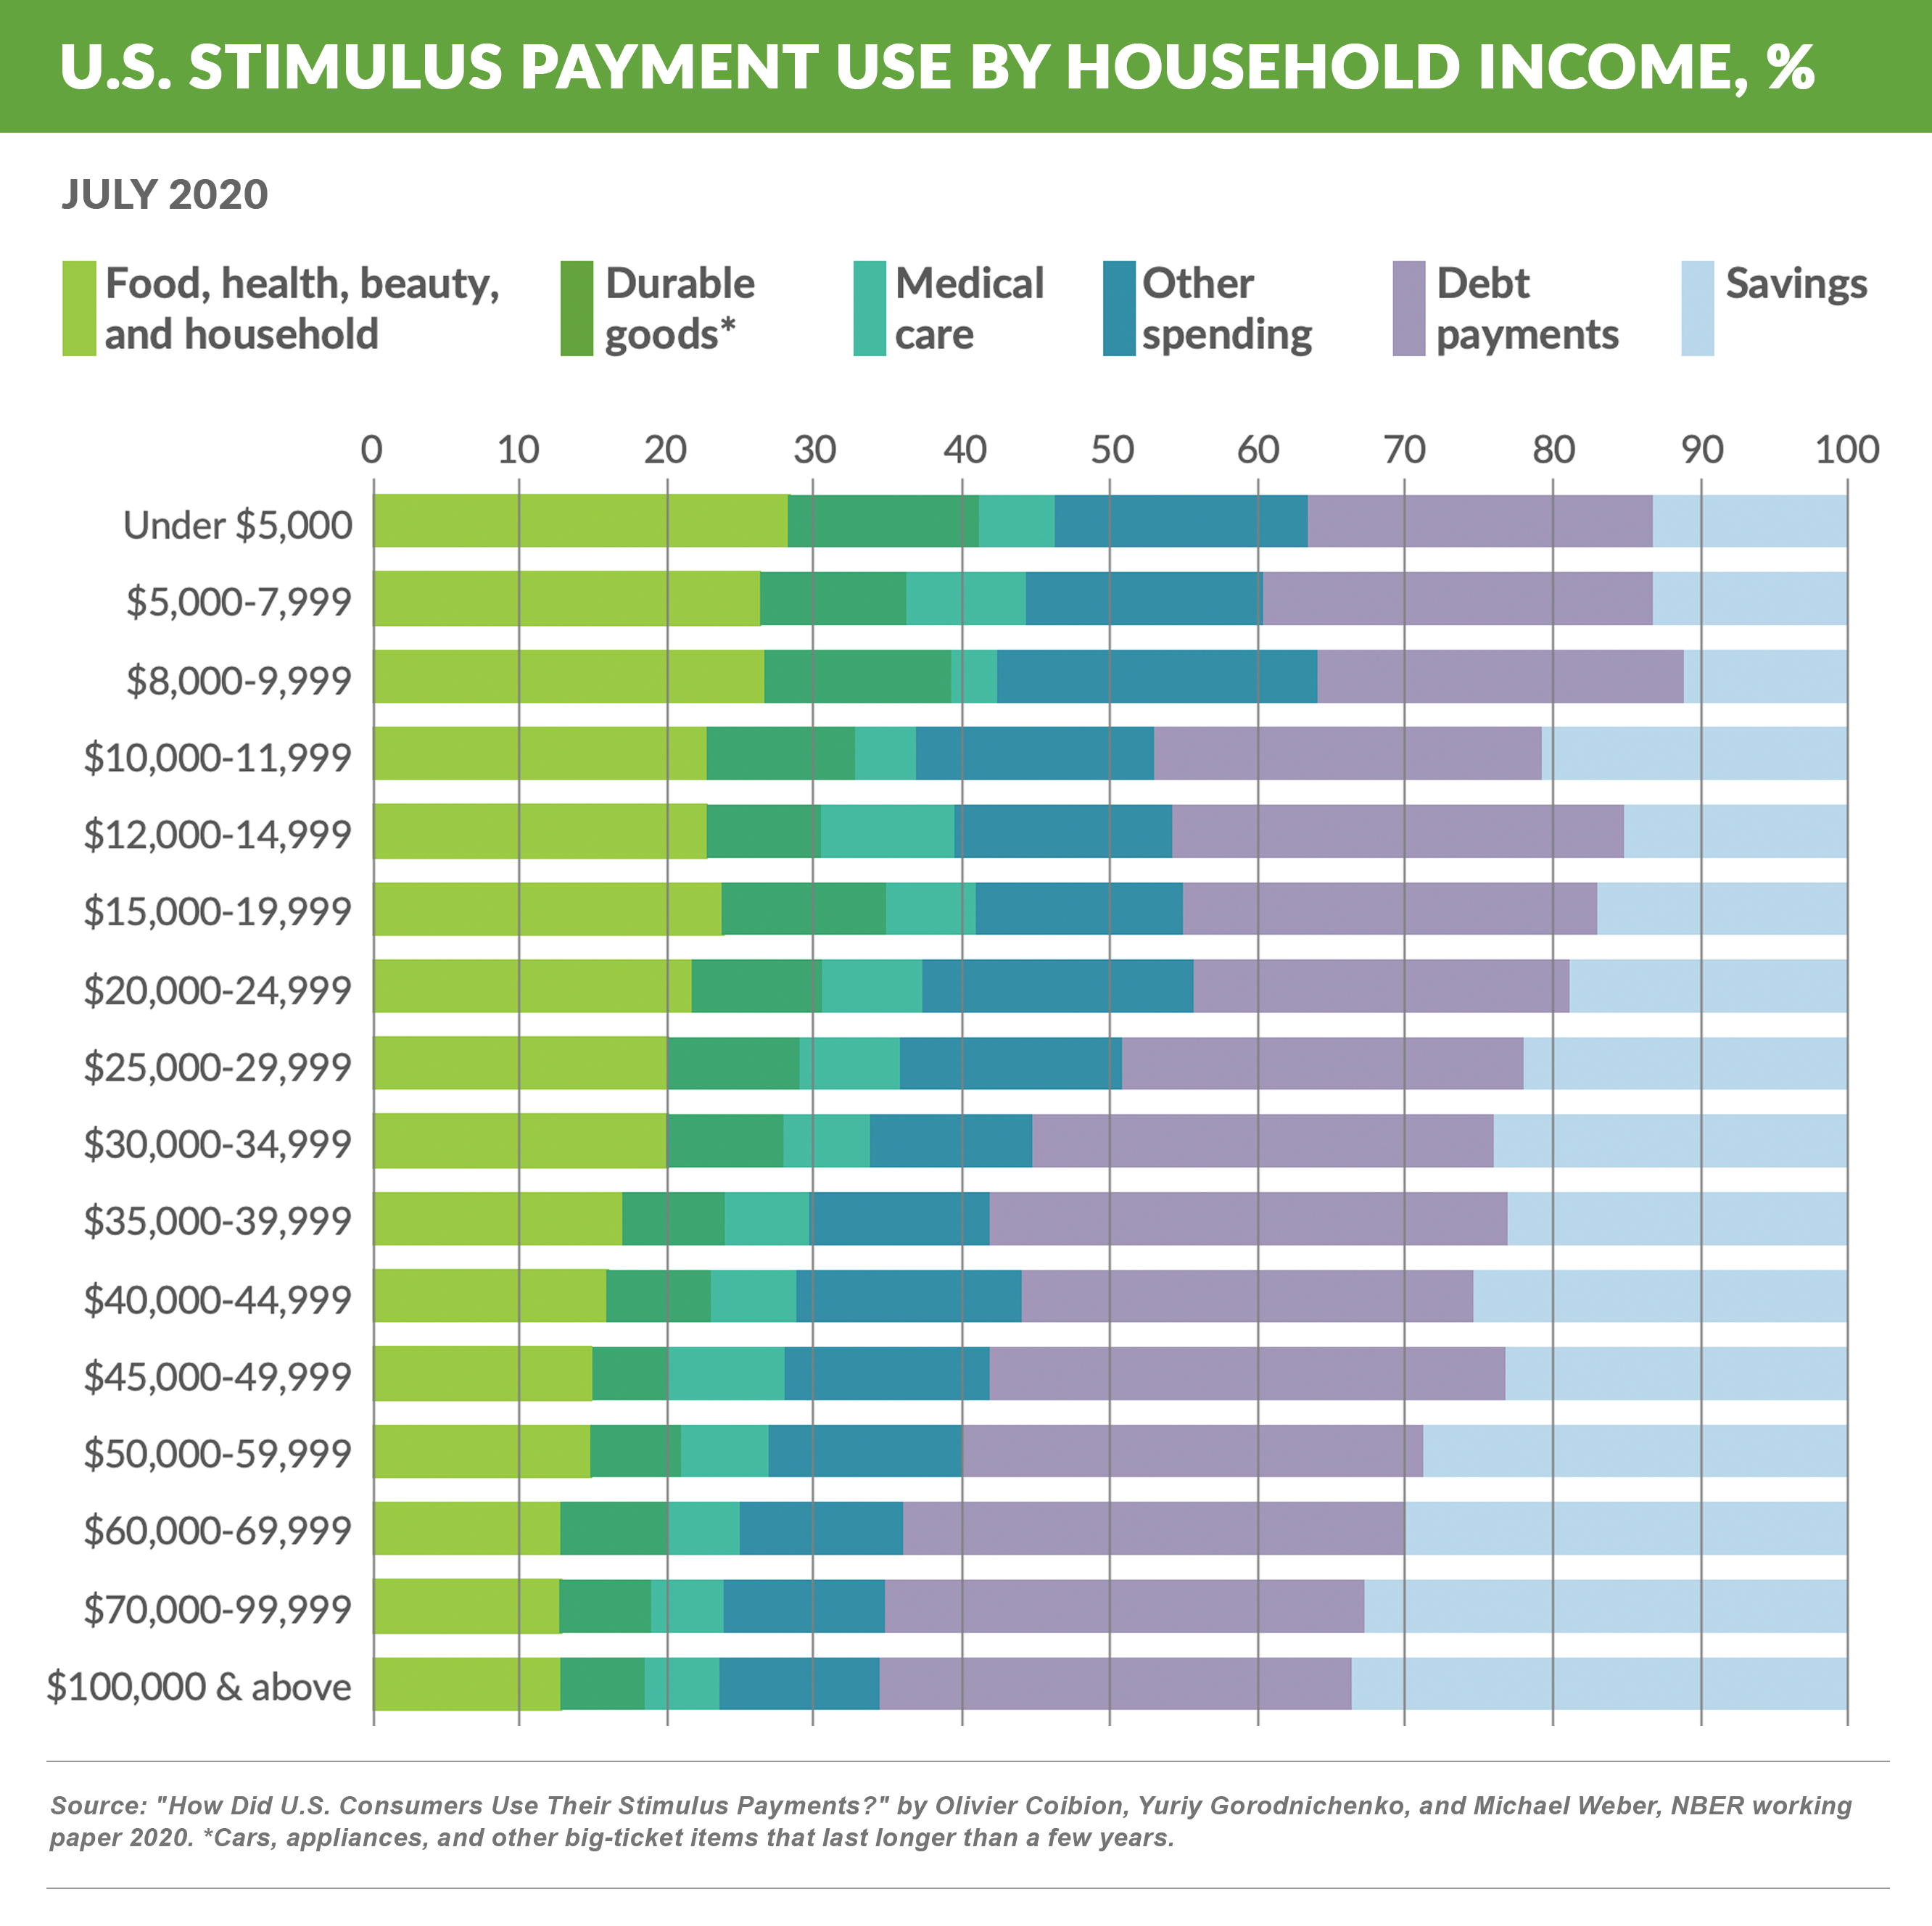 US Stimulus Payment Use by Household Income